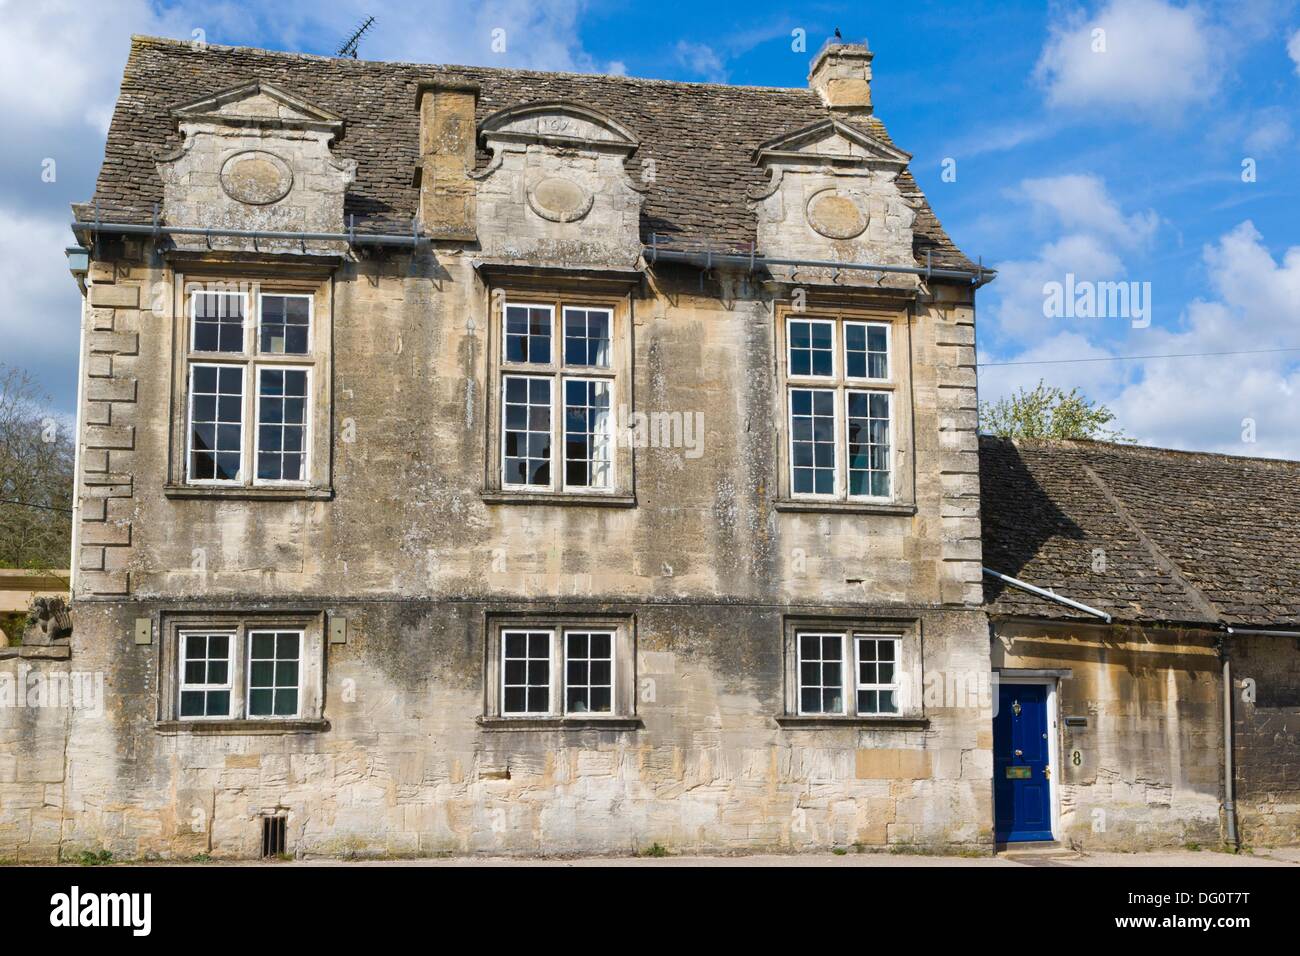 High Street, Burford, Cotswolds, West Oxfordshire, England, Regno Unito Foto Stock